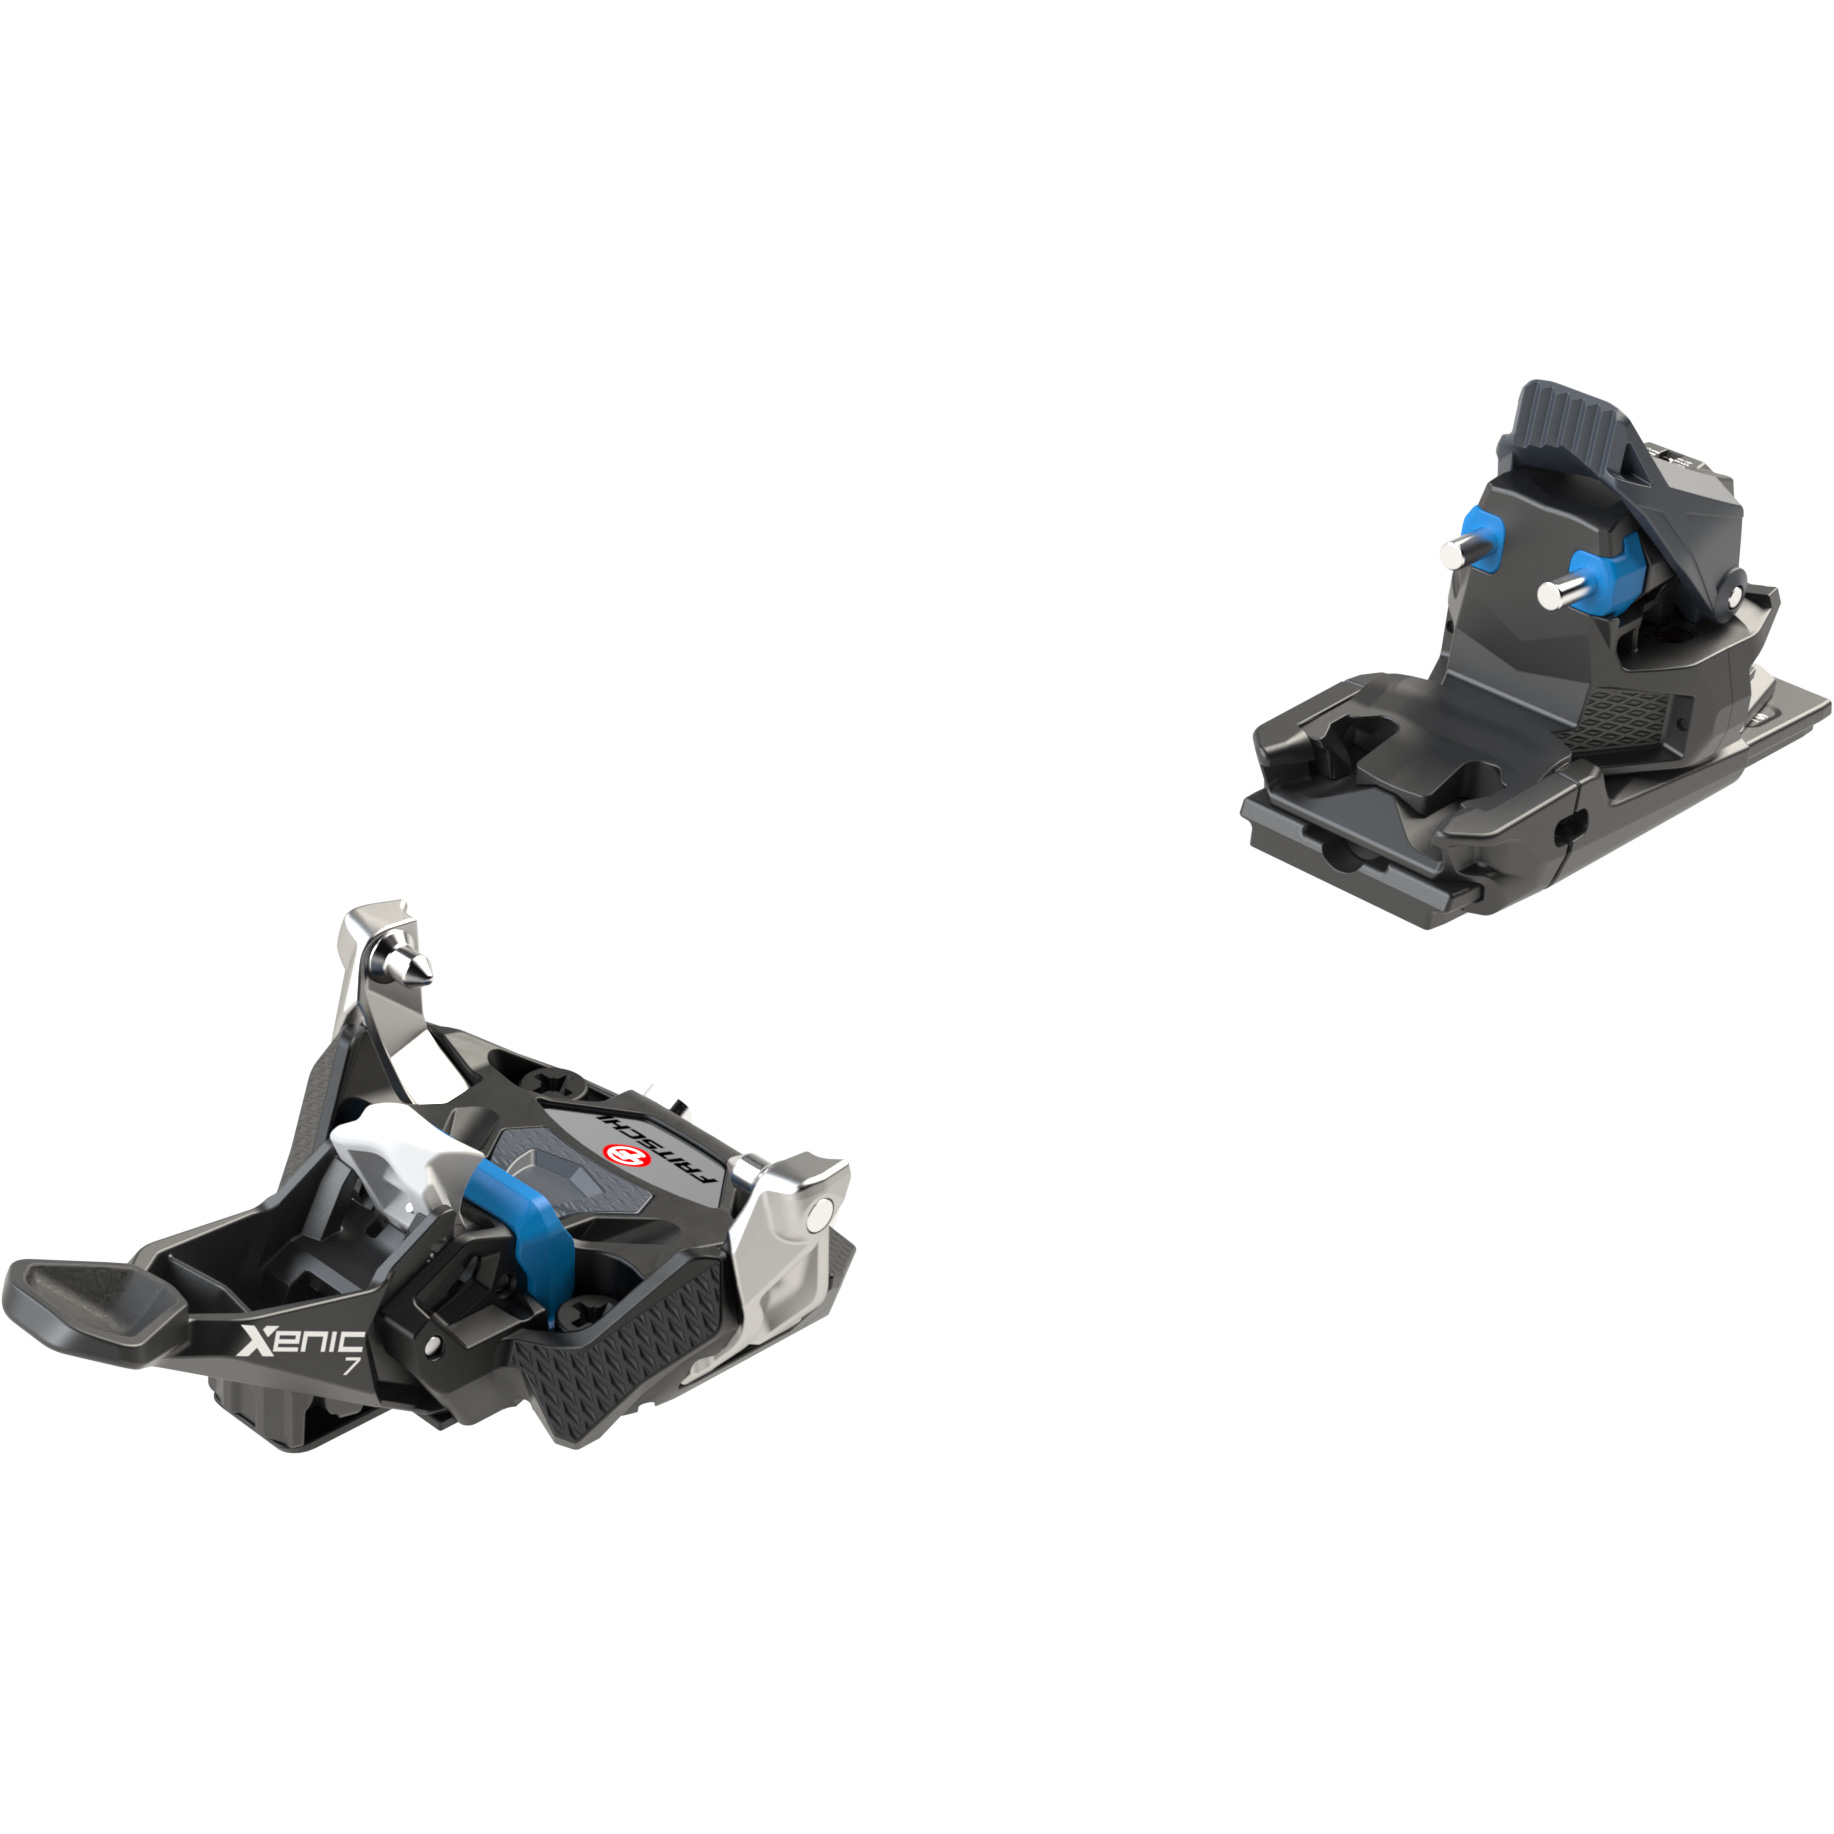 Xenic 7 Touring Binding without Brakes